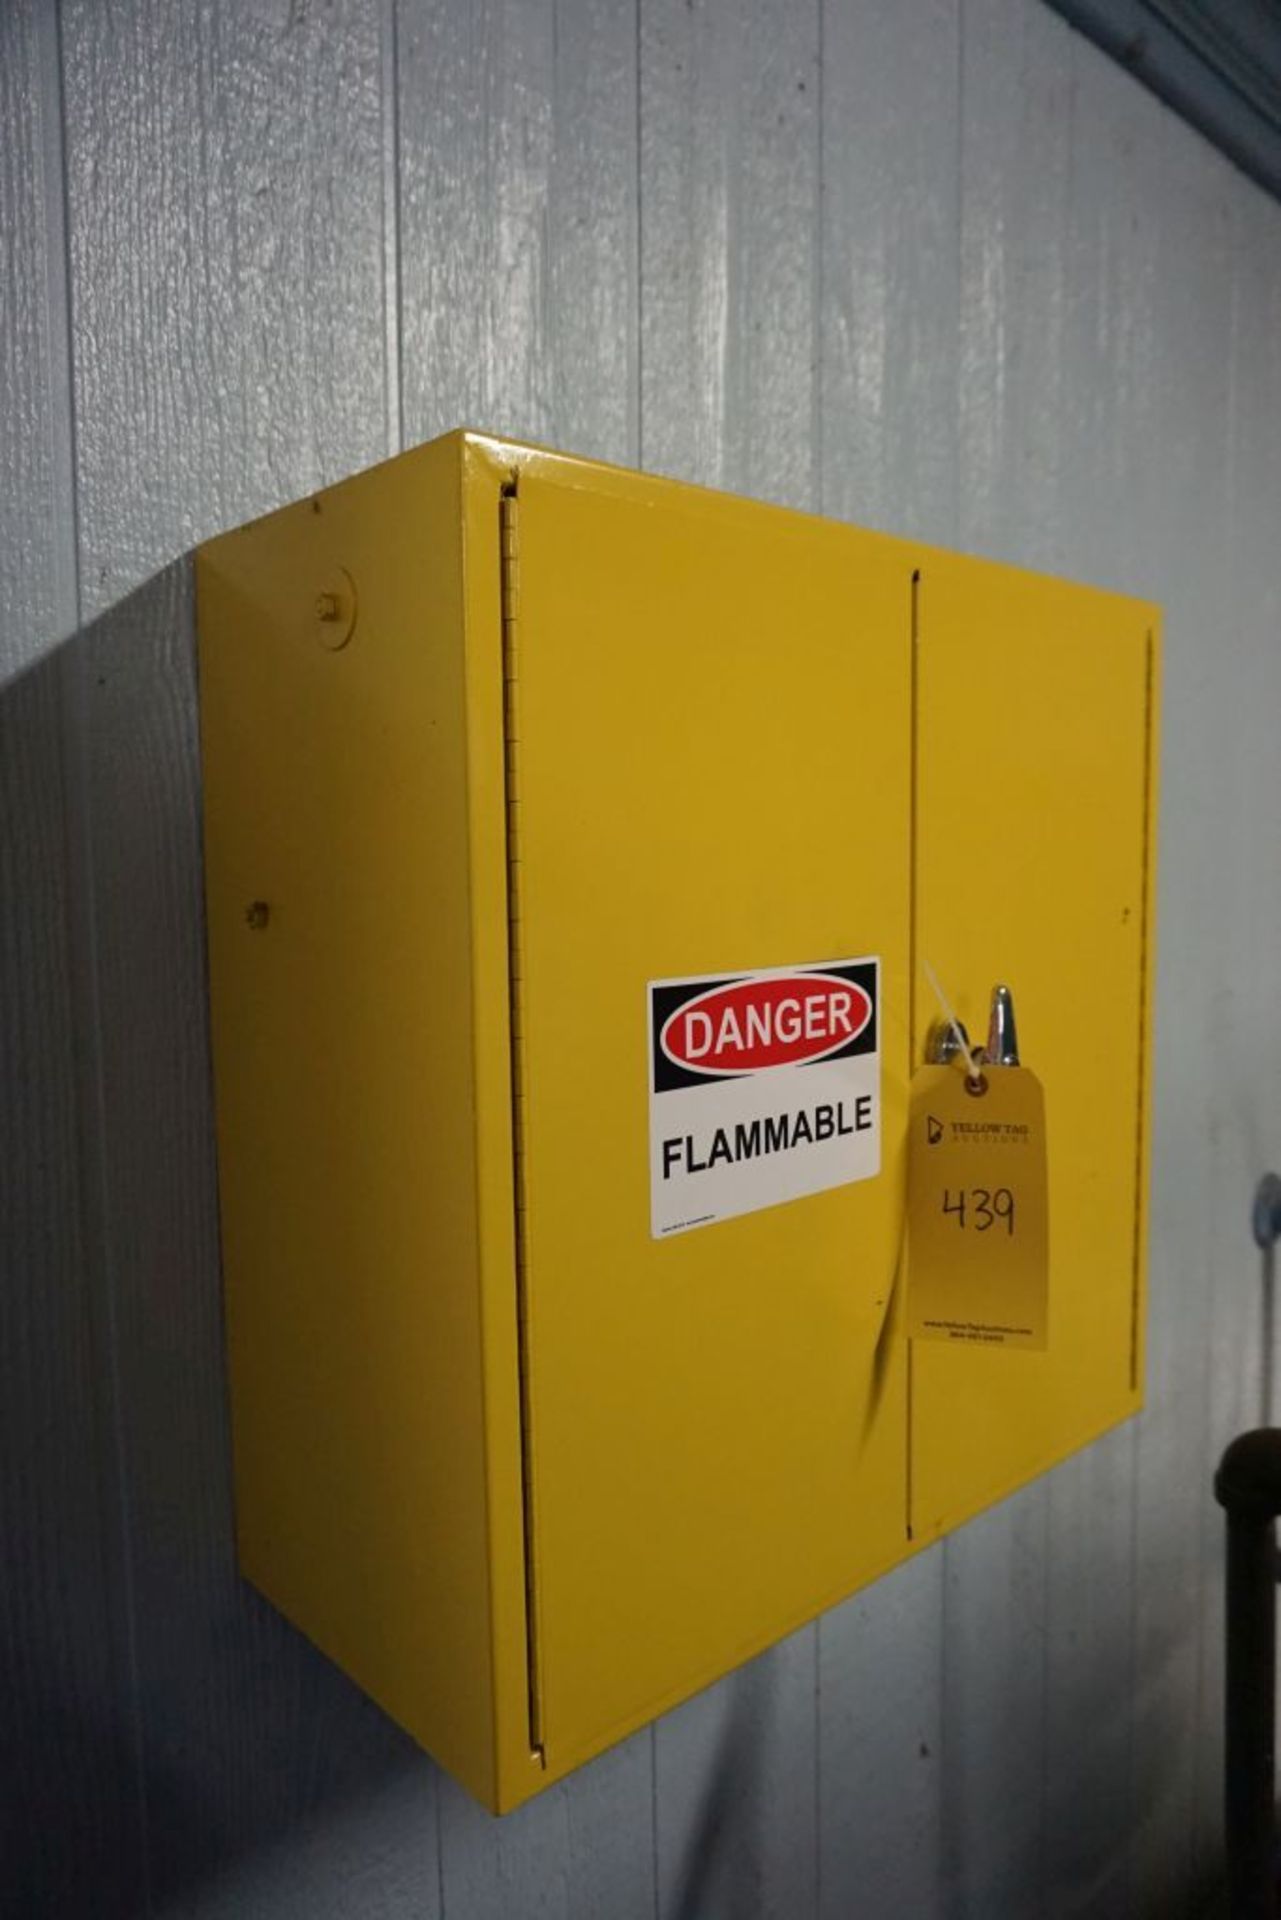 Wall Mounted Flammable Storage Cabinet|Lot Tag: 439 - Image 2 of 2